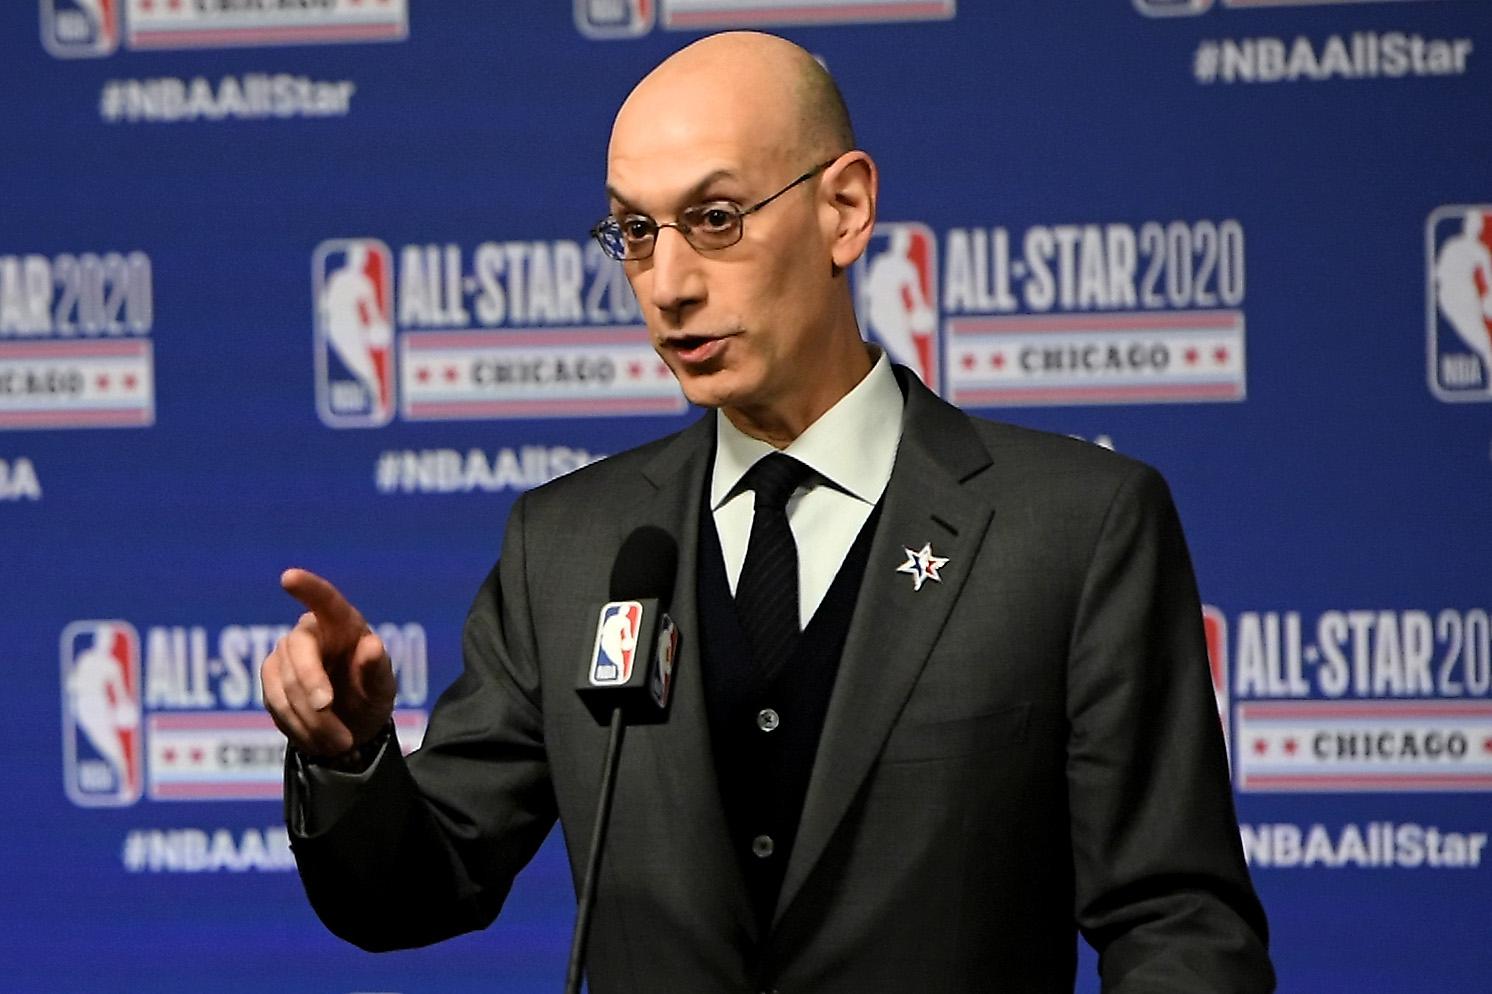 NBA in China: How much money is at stake if relationship sours?